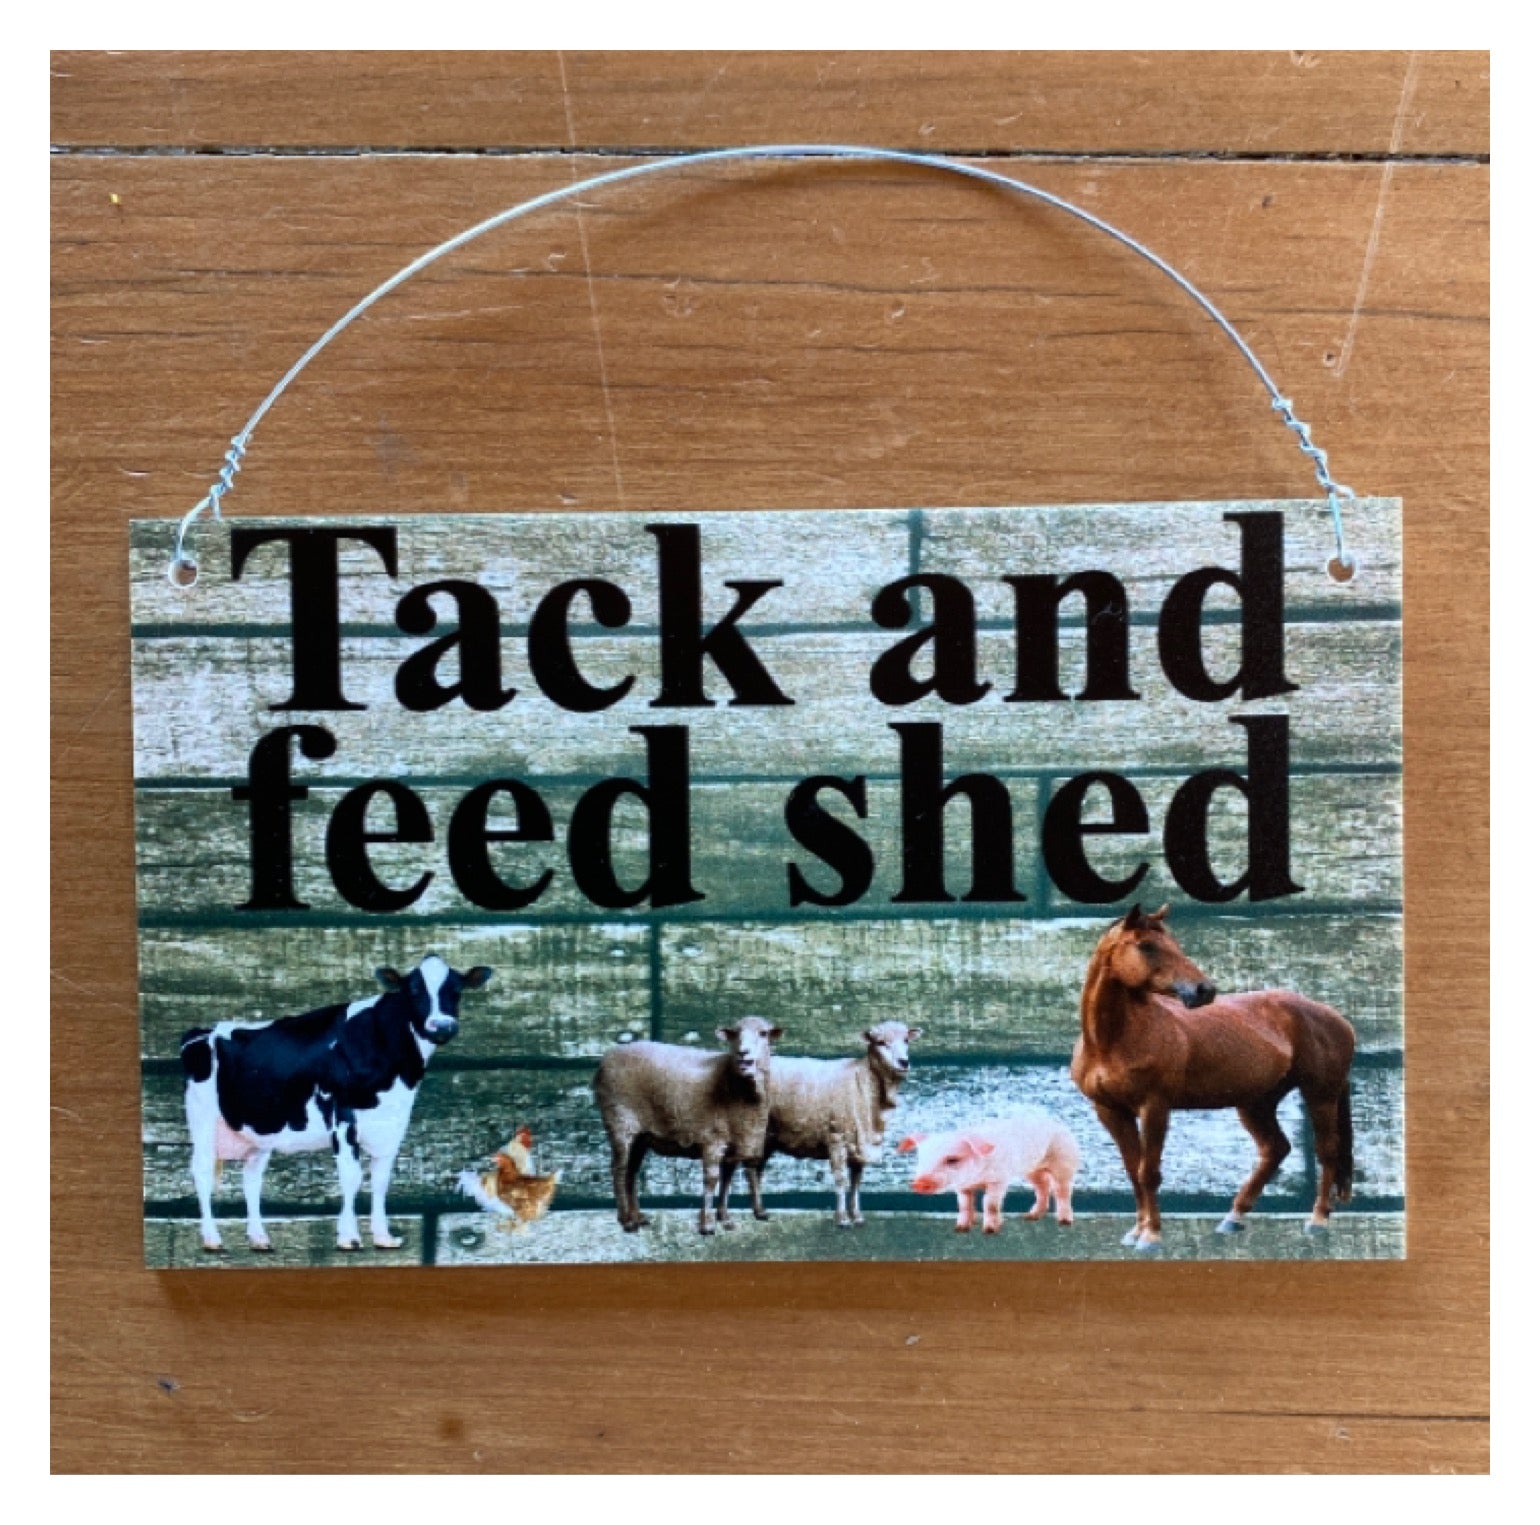 Your Text Custom Wording Farm Animals Sign - The Renmy Store Homewares & Gifts 